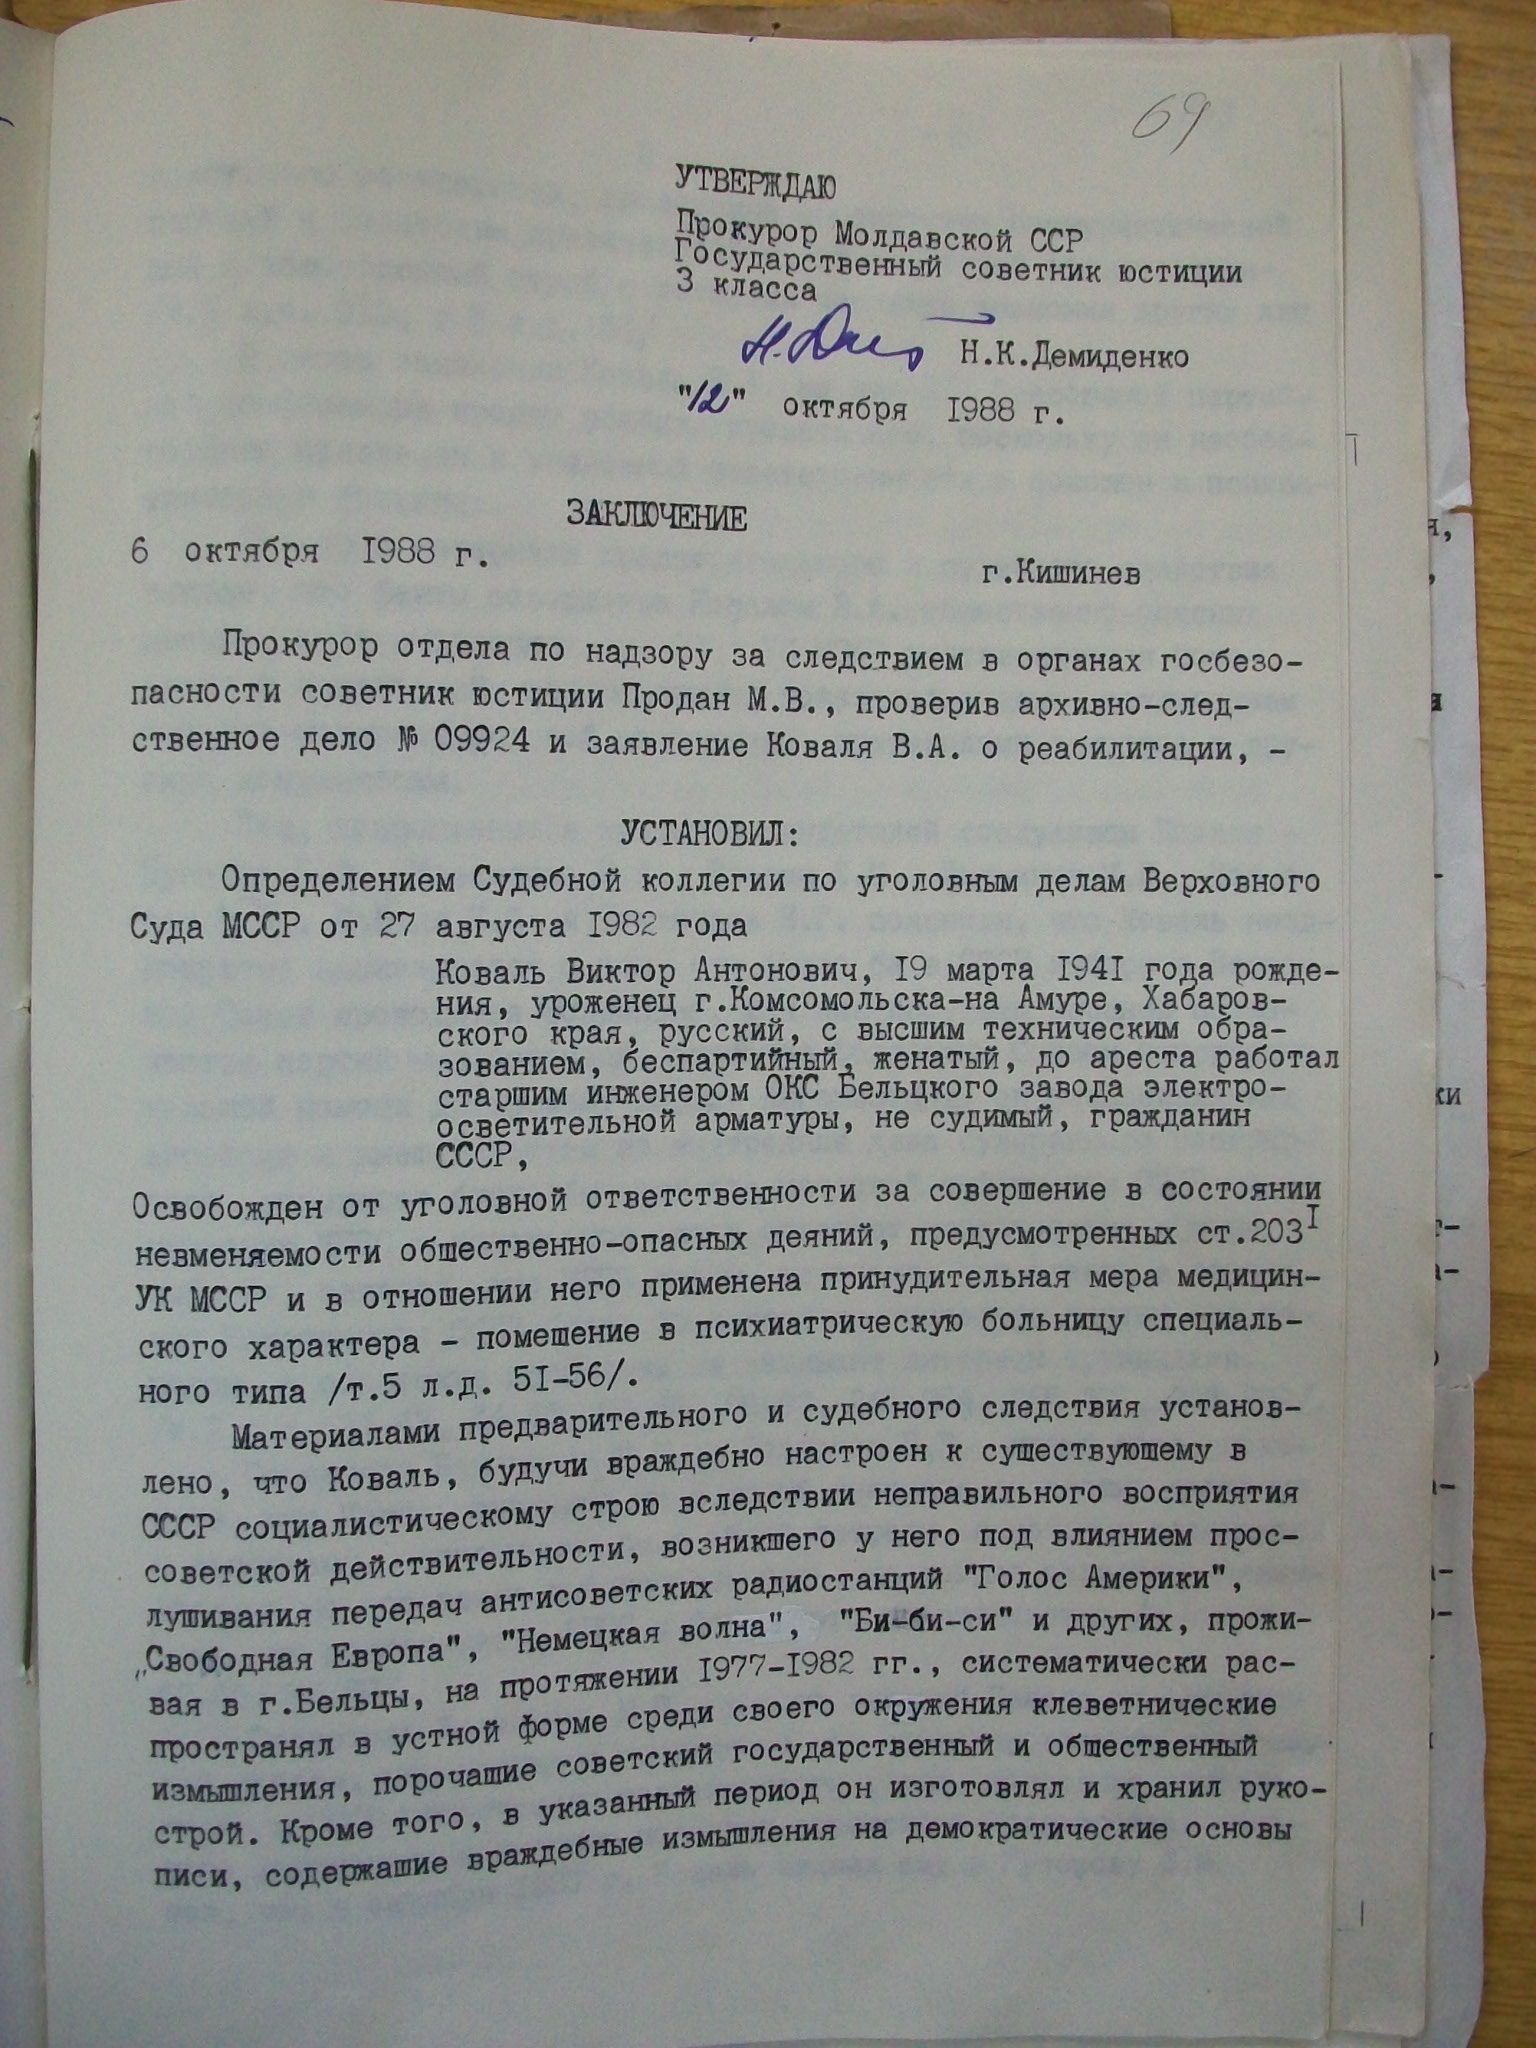 First page of the Resolution of the General Prosecutor’s Office of the Moldavian SSR concerning Viktor Koval’s petition 